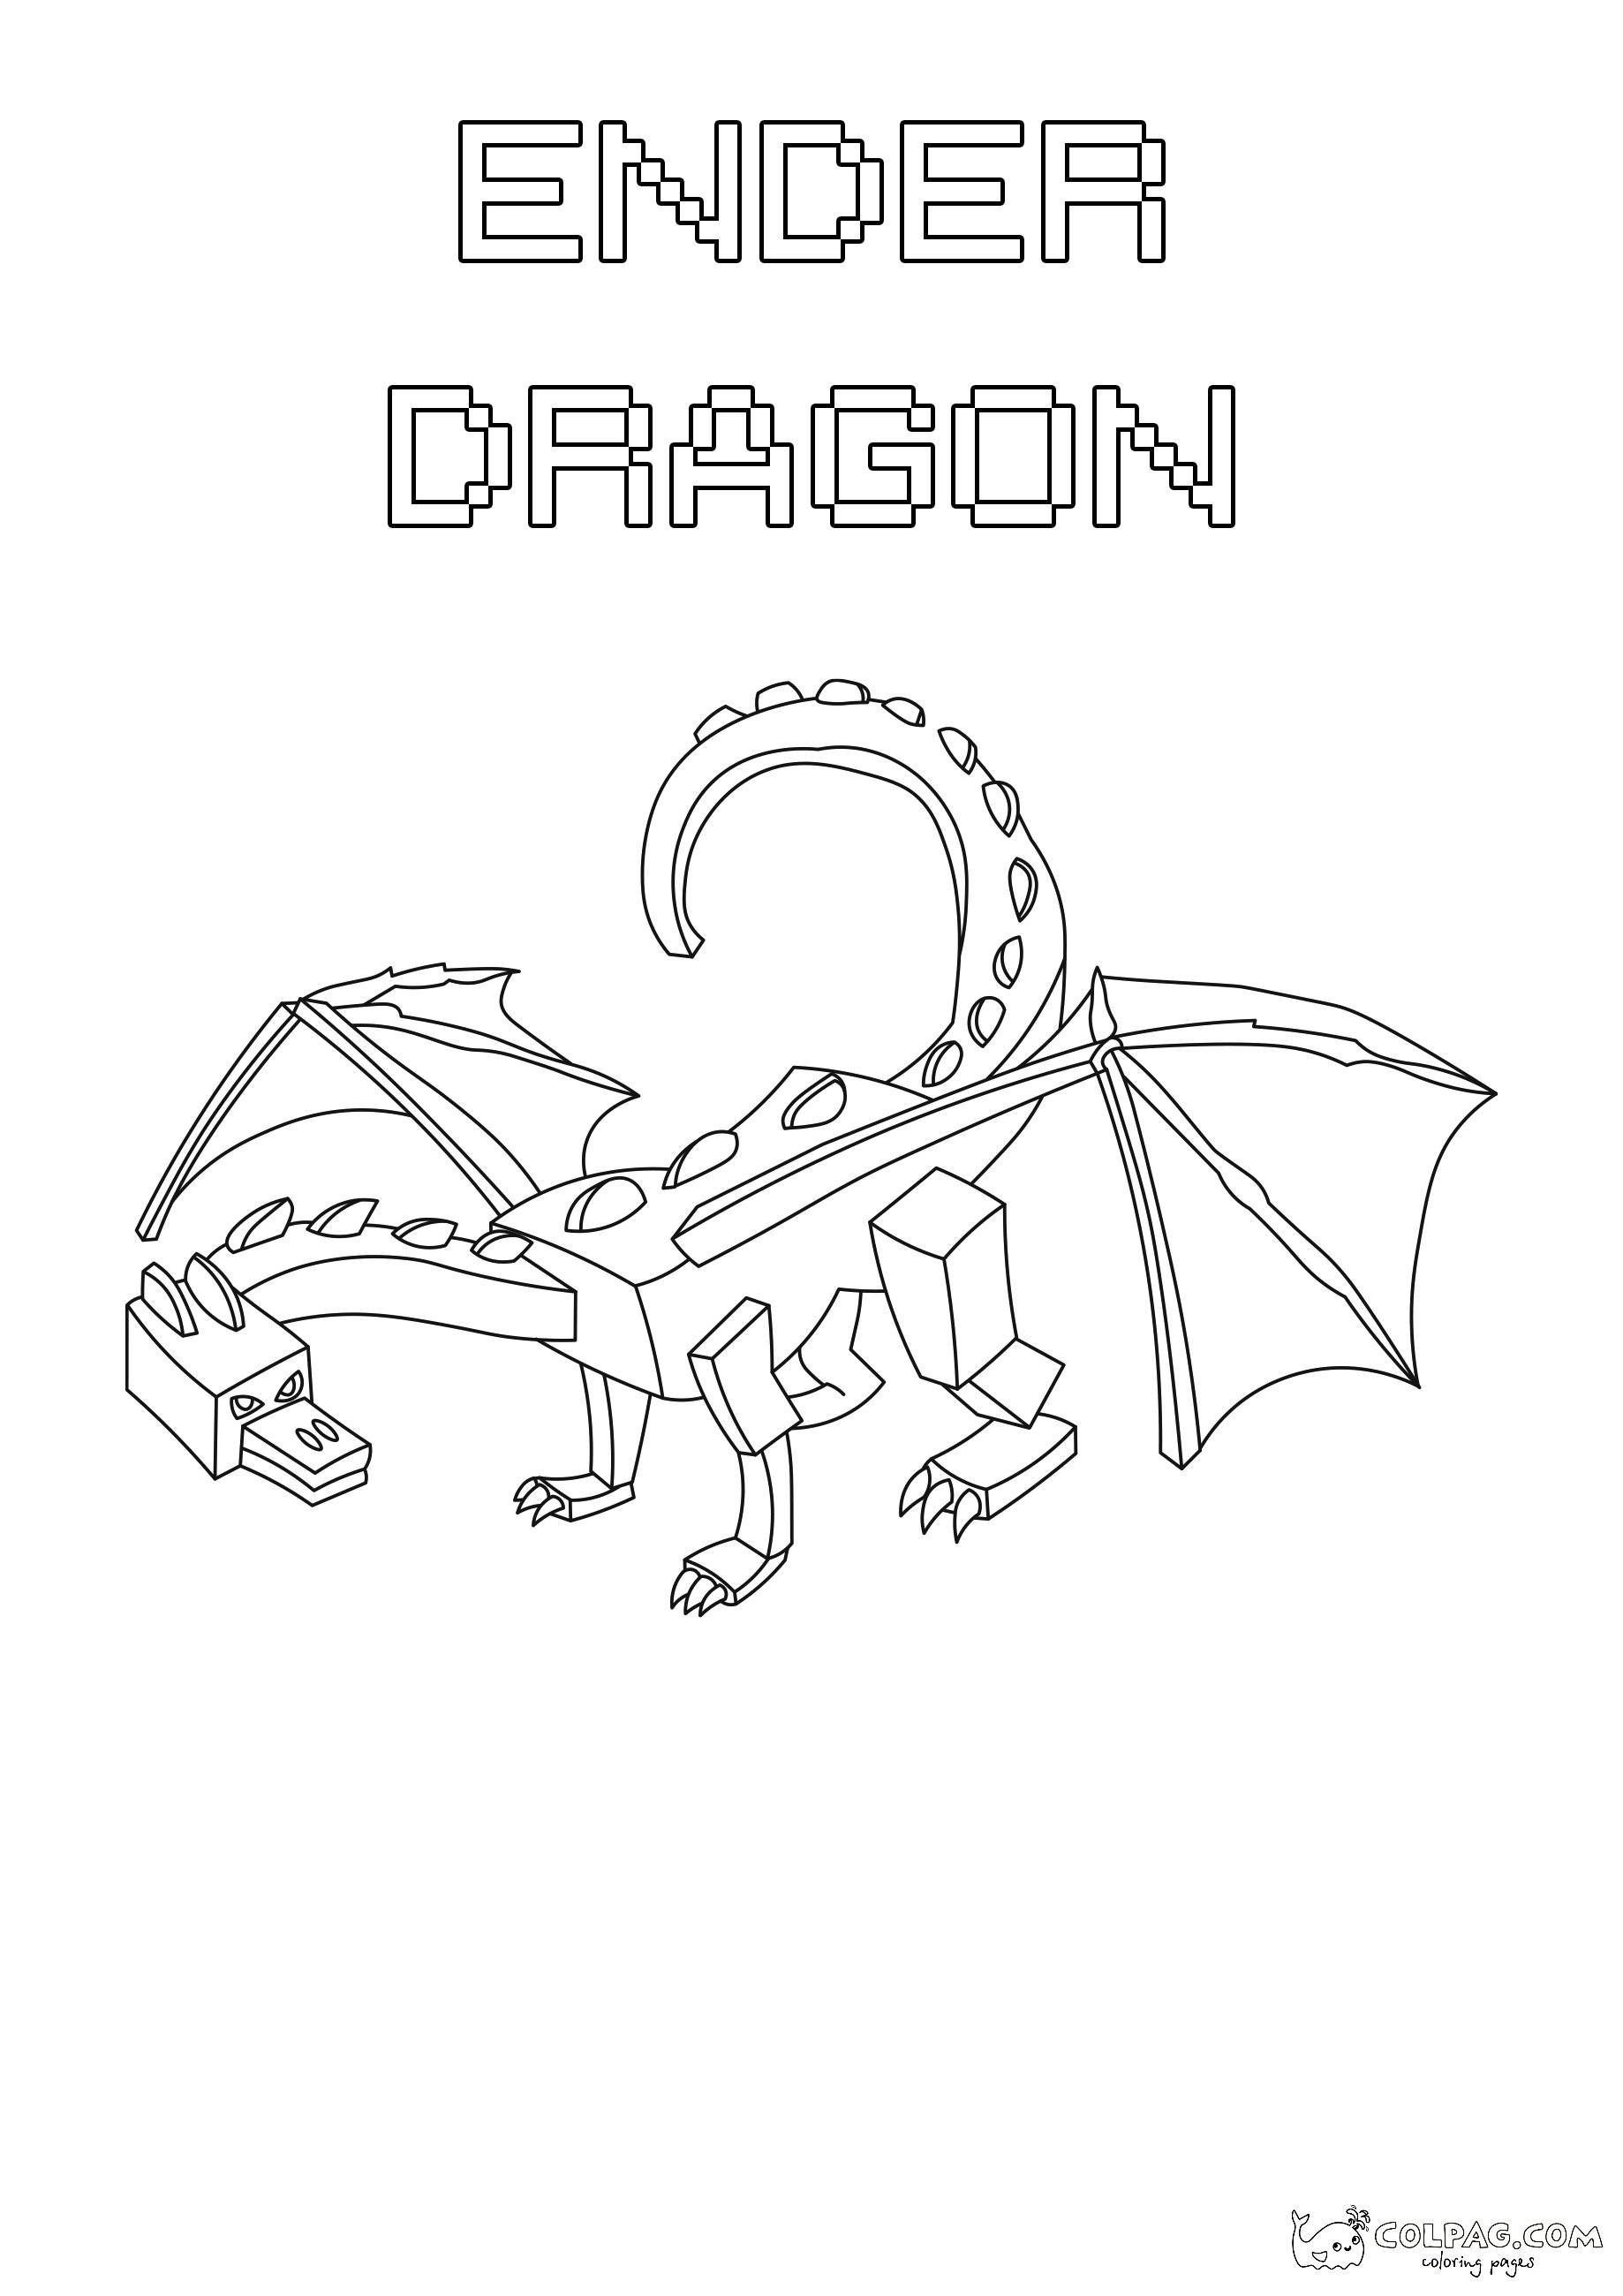 ender-dragon-1-minecraft-coloring-page-colpag